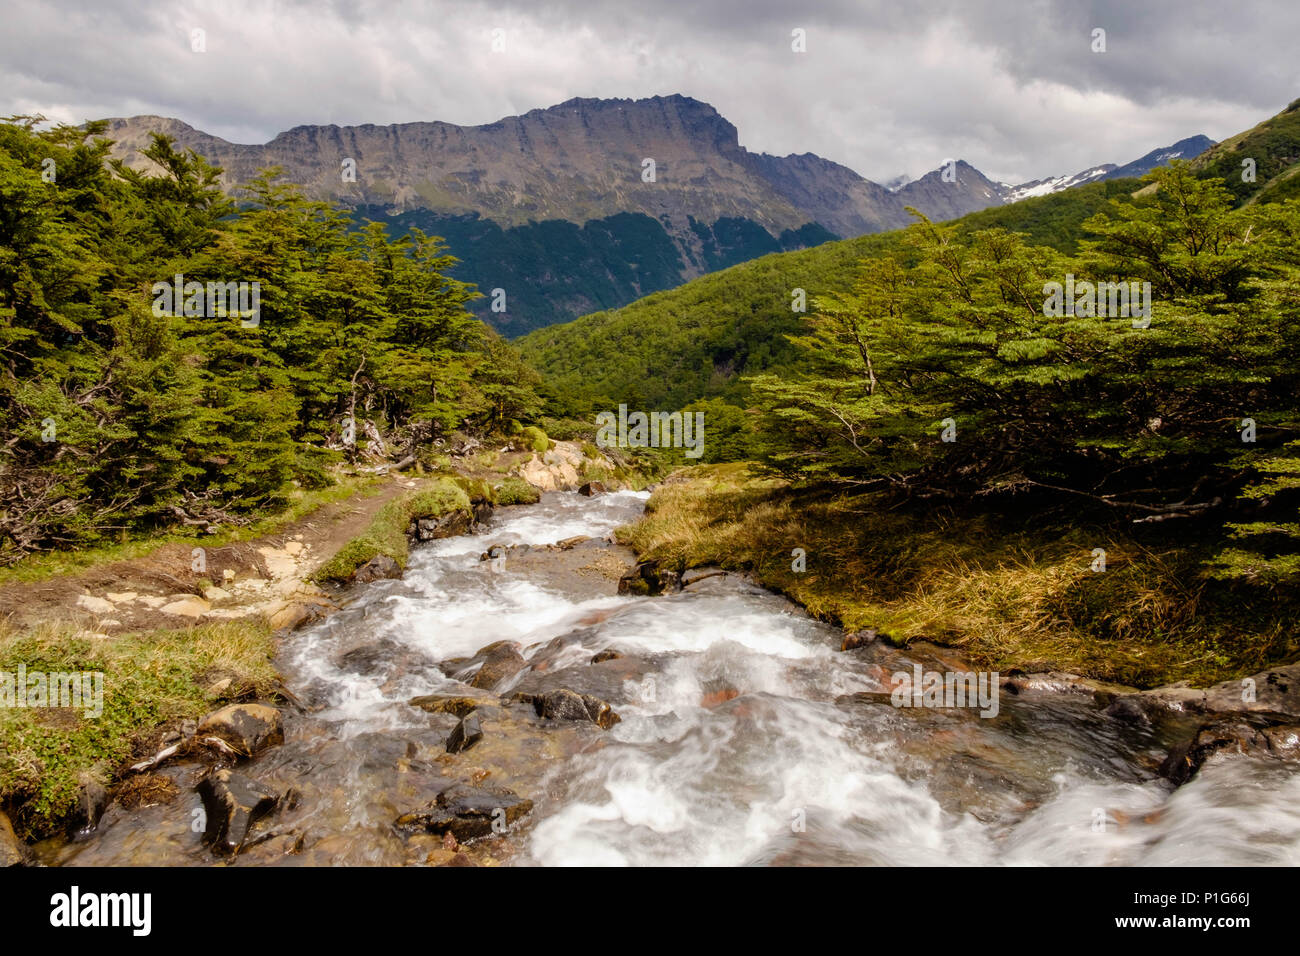 The water of a river descends fast. A bit higher, the river is born out of 'Laguna de los Témpanos, an adventurous hiking destination near Ushuaia. Stock Photo